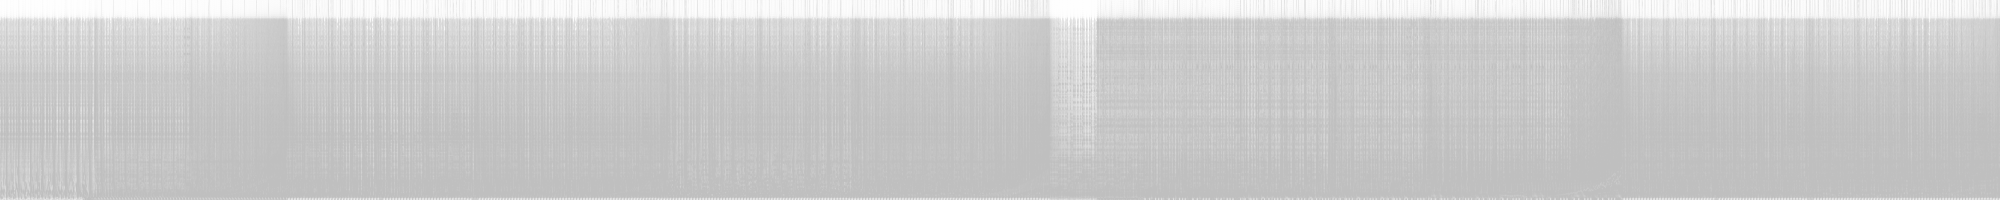 Spectrogram for Breeze my mind (MY IMAGINARY TITS AND NICE BUTT RMX) [another wip]